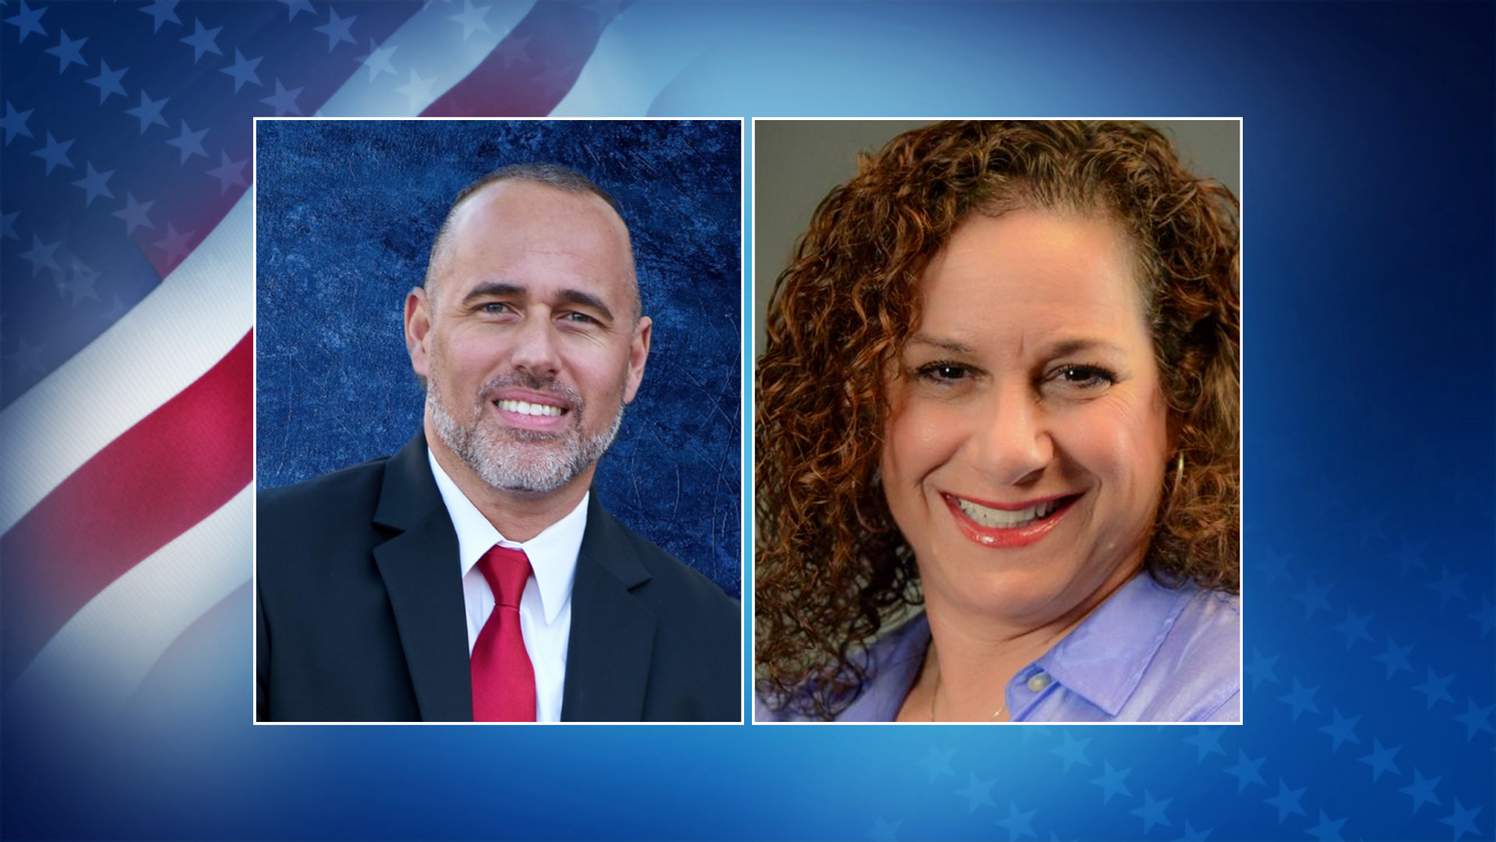 Meet the candidates: Here’s who’s running for Seminole County tax collector